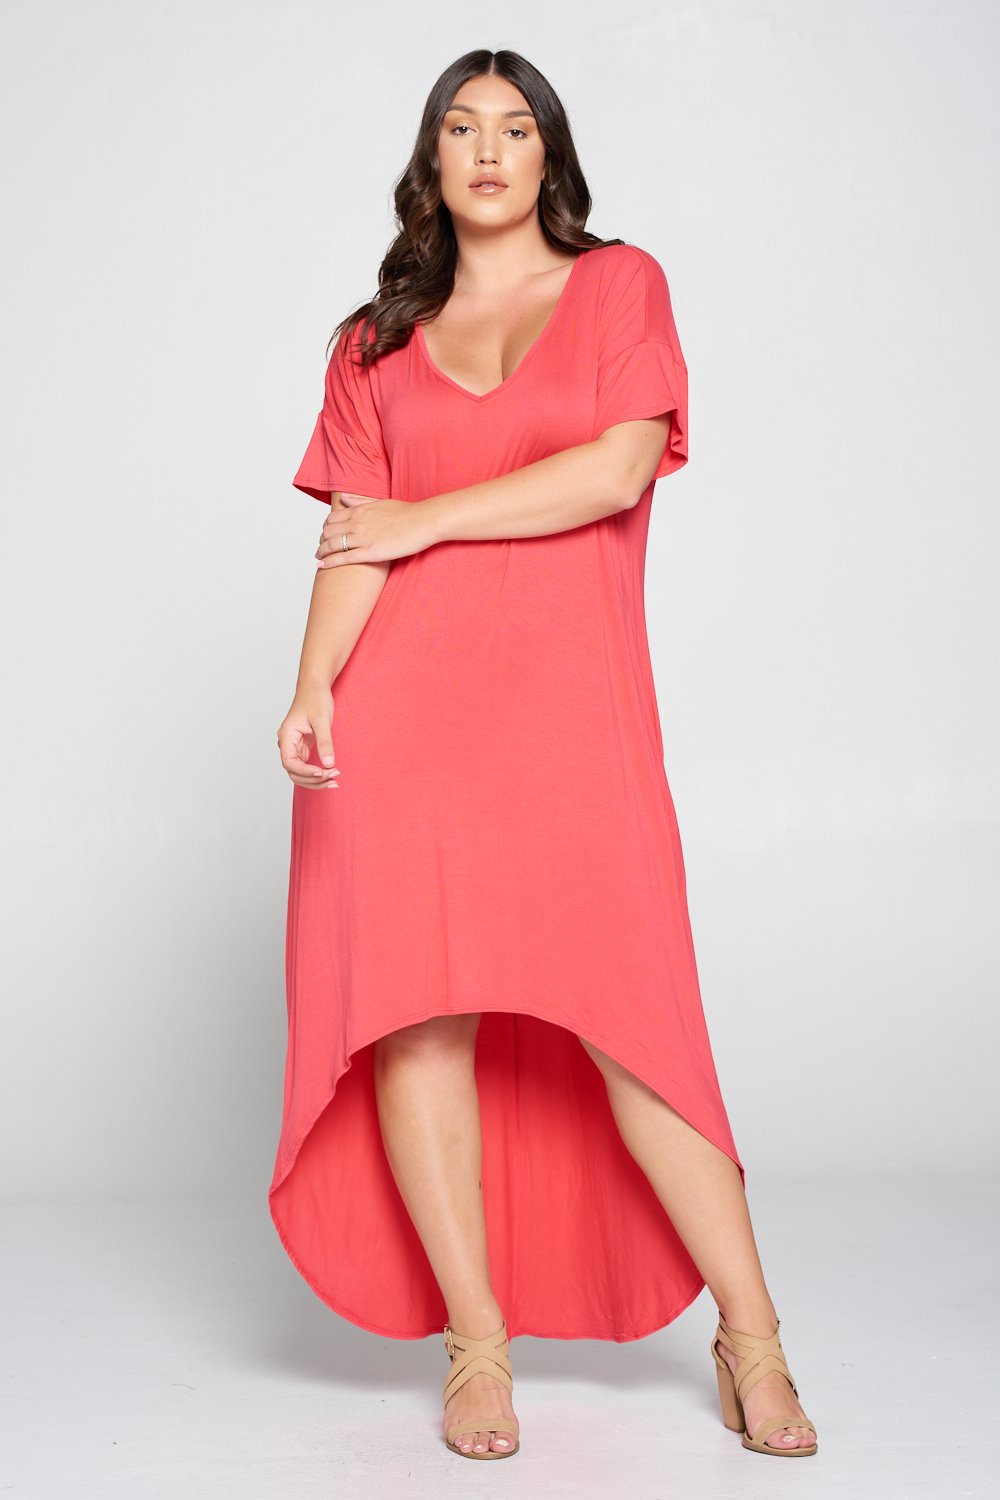 livd L I V D women's contemporary plus size clothing high low hi lo dress with pockets v neck sleeves in coral pink